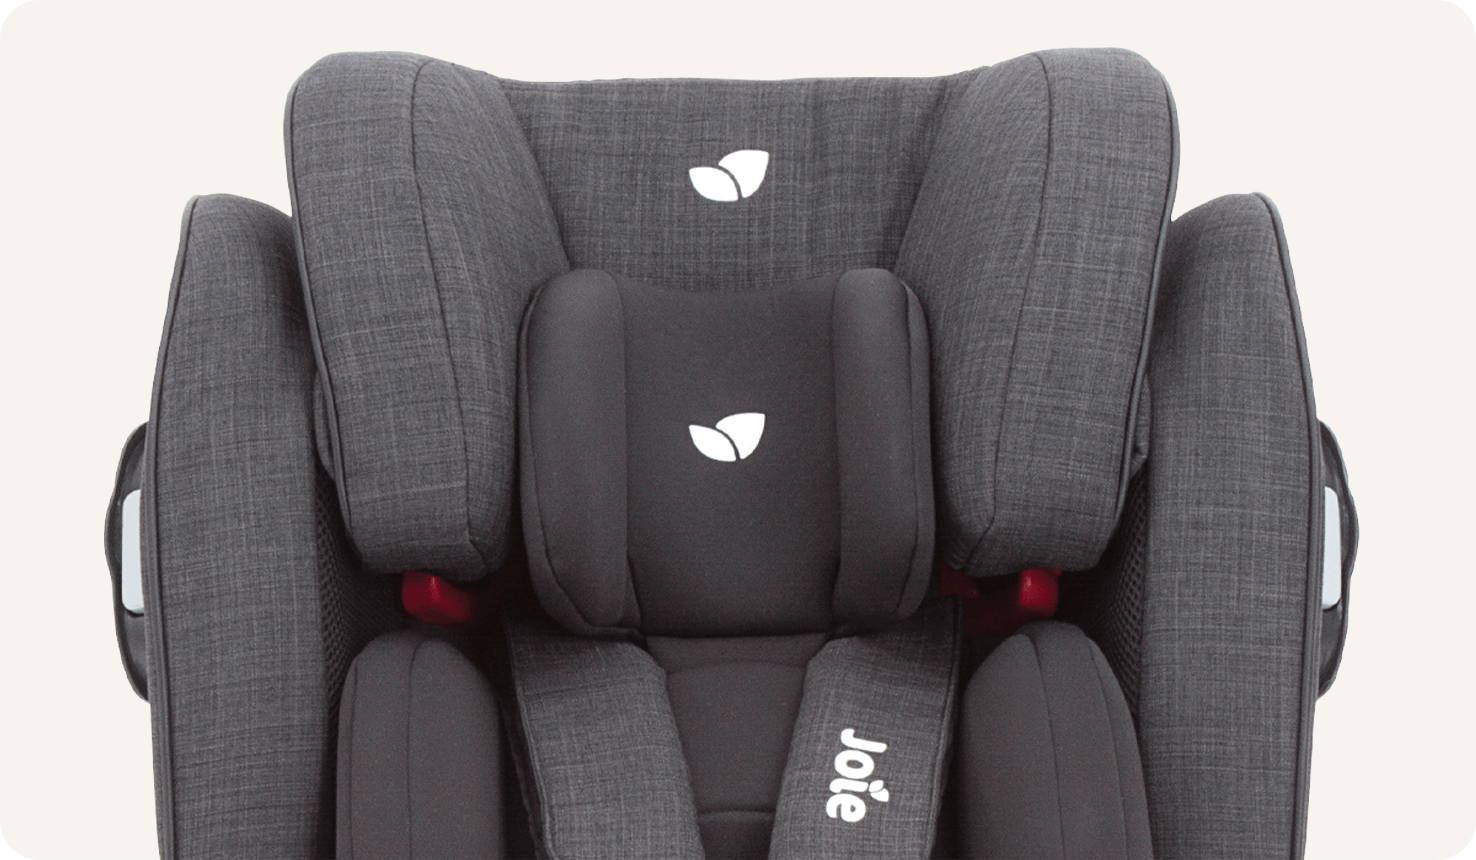 Zoomed in image of Joie stages ISOFIX car seat headrest showing the tri-protect headrest
